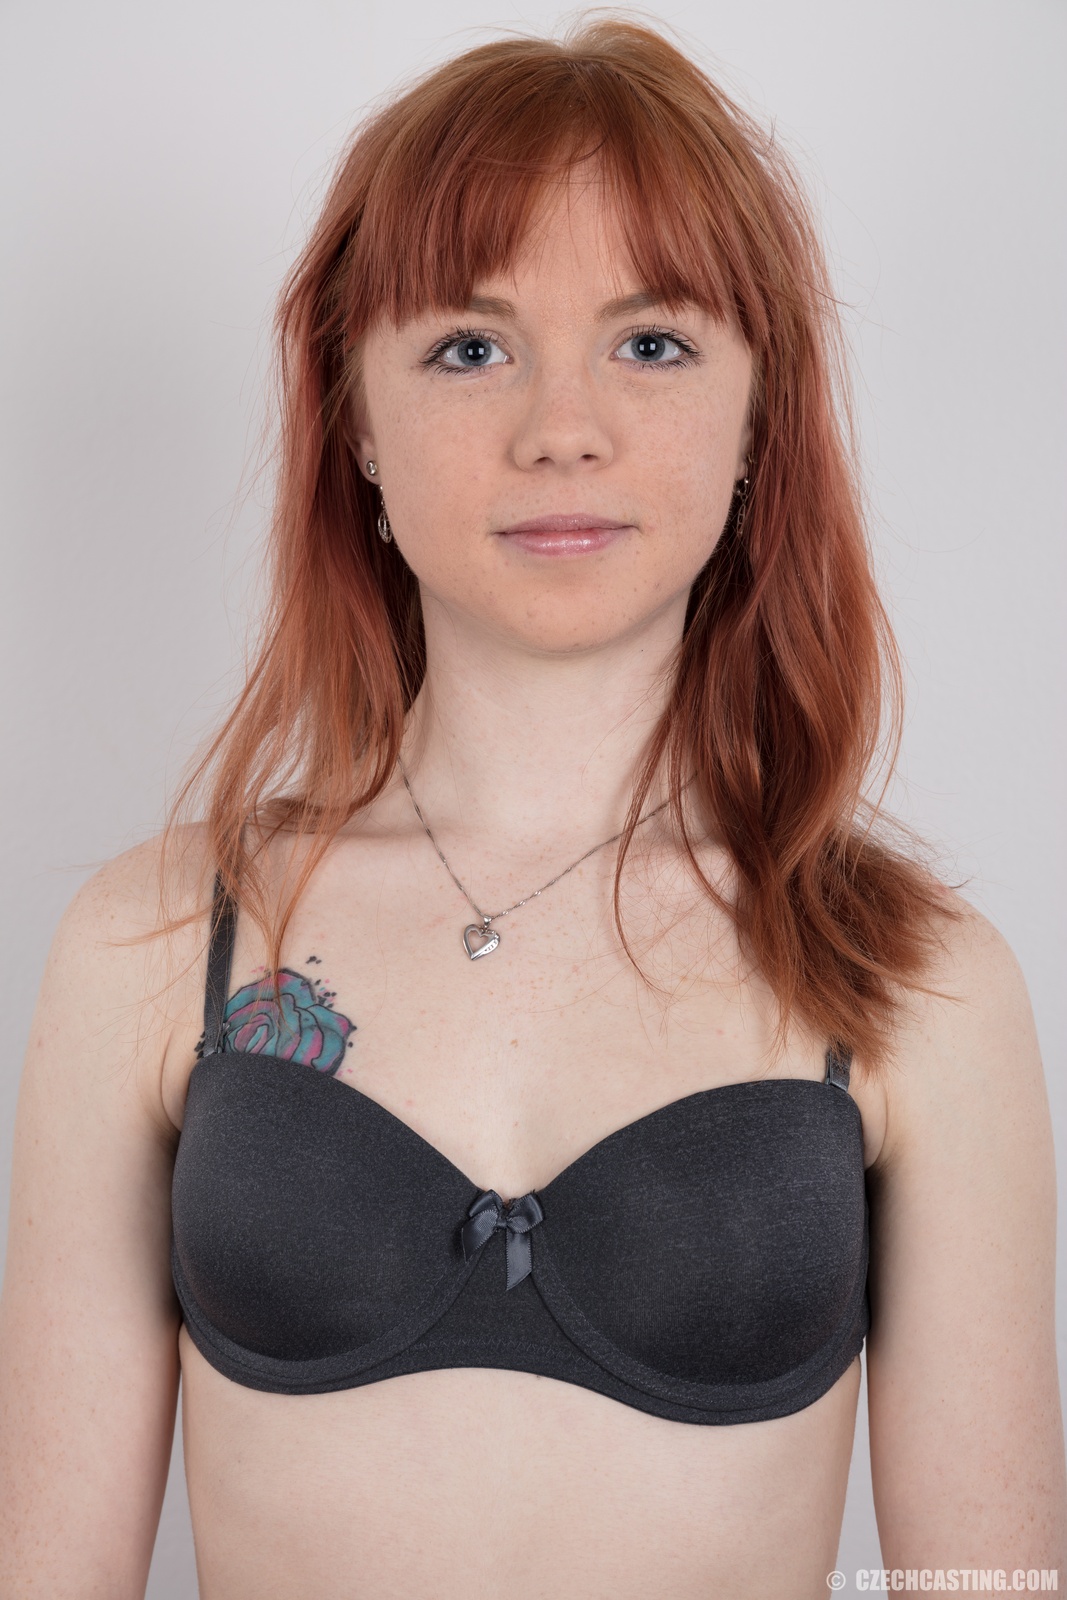 wpid-stunningly-cute-young-redhead-with-freckles-niky-in-the-nude5.jpg